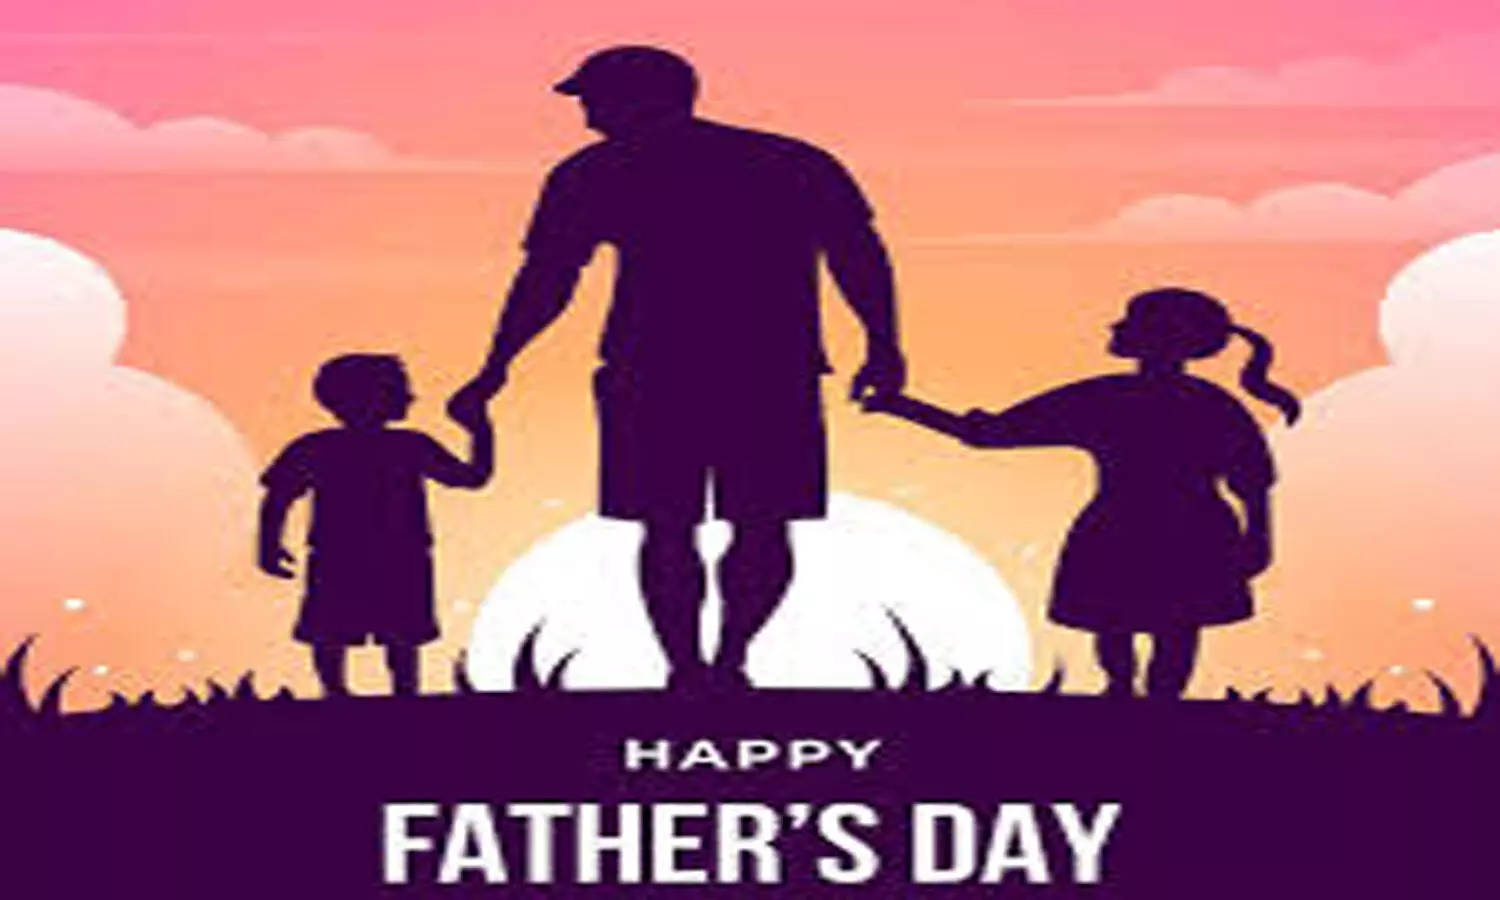 Happy Fathers Day 2021: Check out best Quotes, Wishes to celebrate Fatherhood